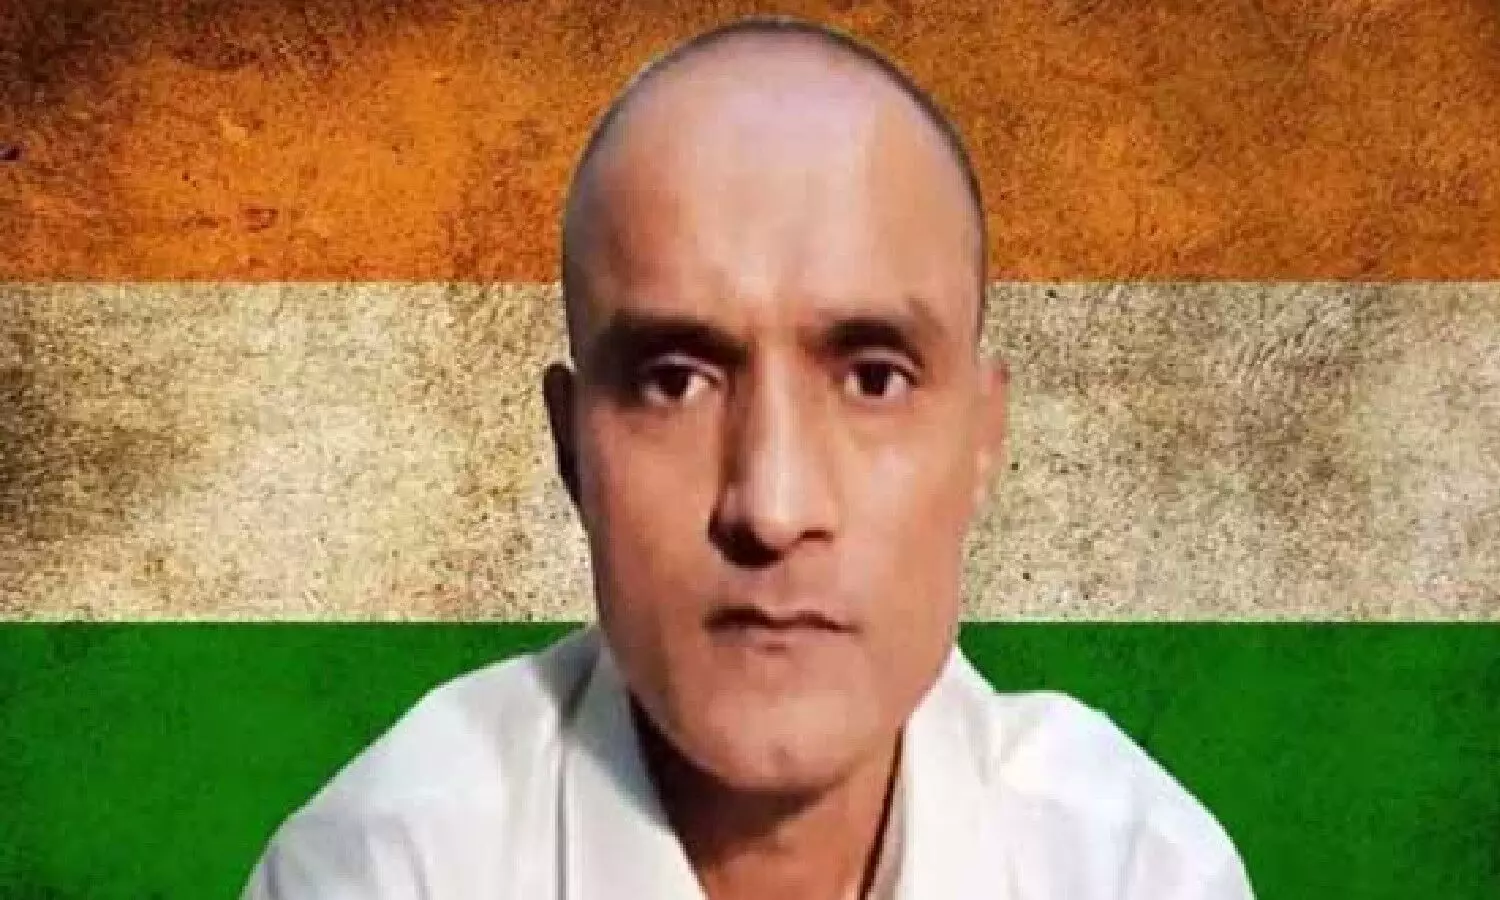 The Pakistan National Assembly on Thursday 10 June passed a bill giving Kulbhushan Jadhav the right to appeal.